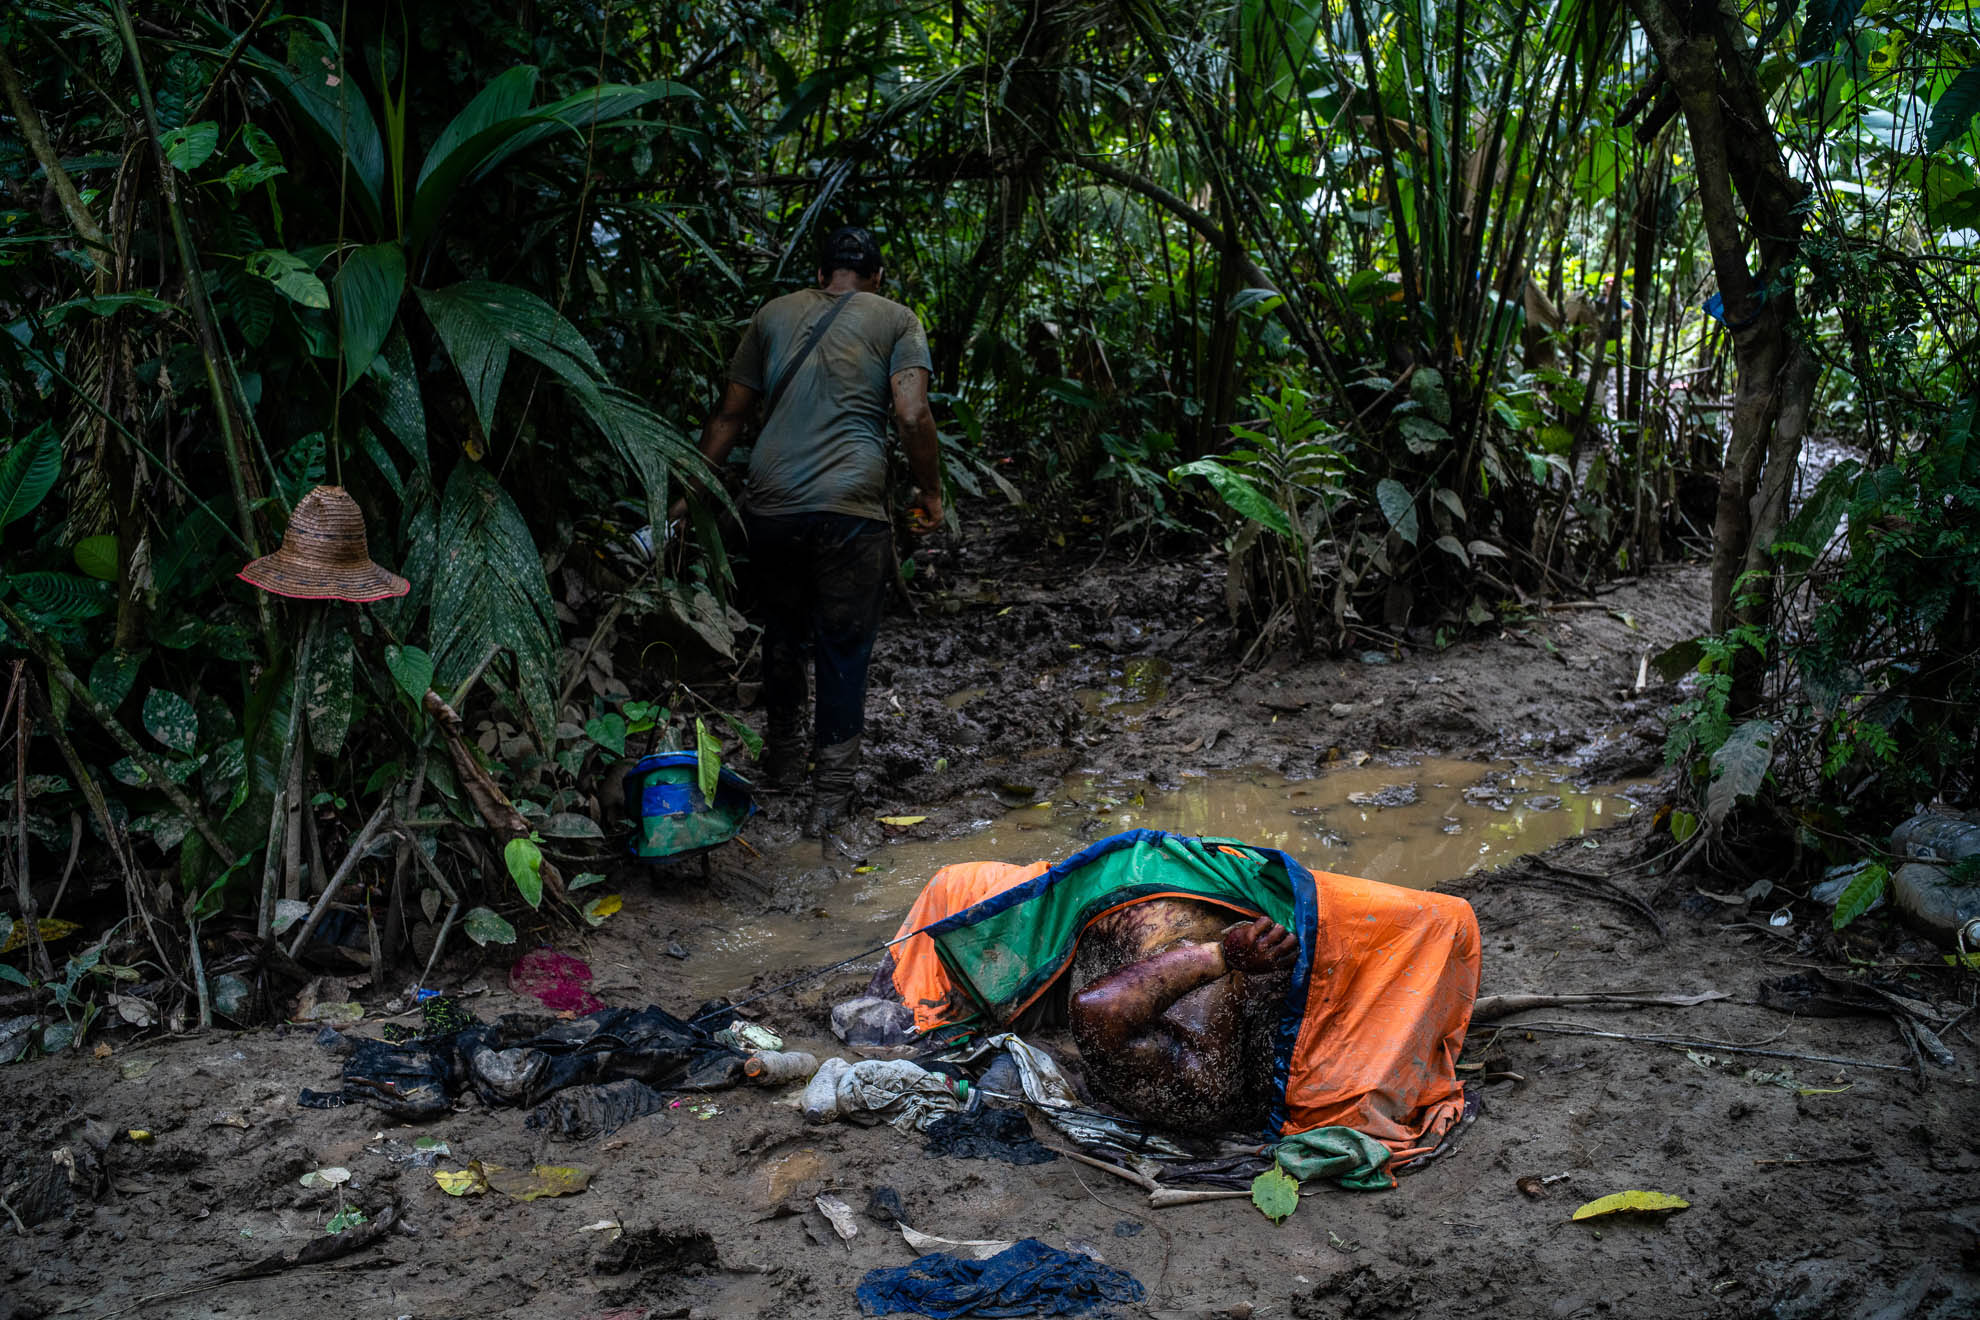 At least 39 people have died on the route this year, according to Panama's police, although authorities acknowledge that the real number is probably higher. Many people are reported missing and never found. September 2022.